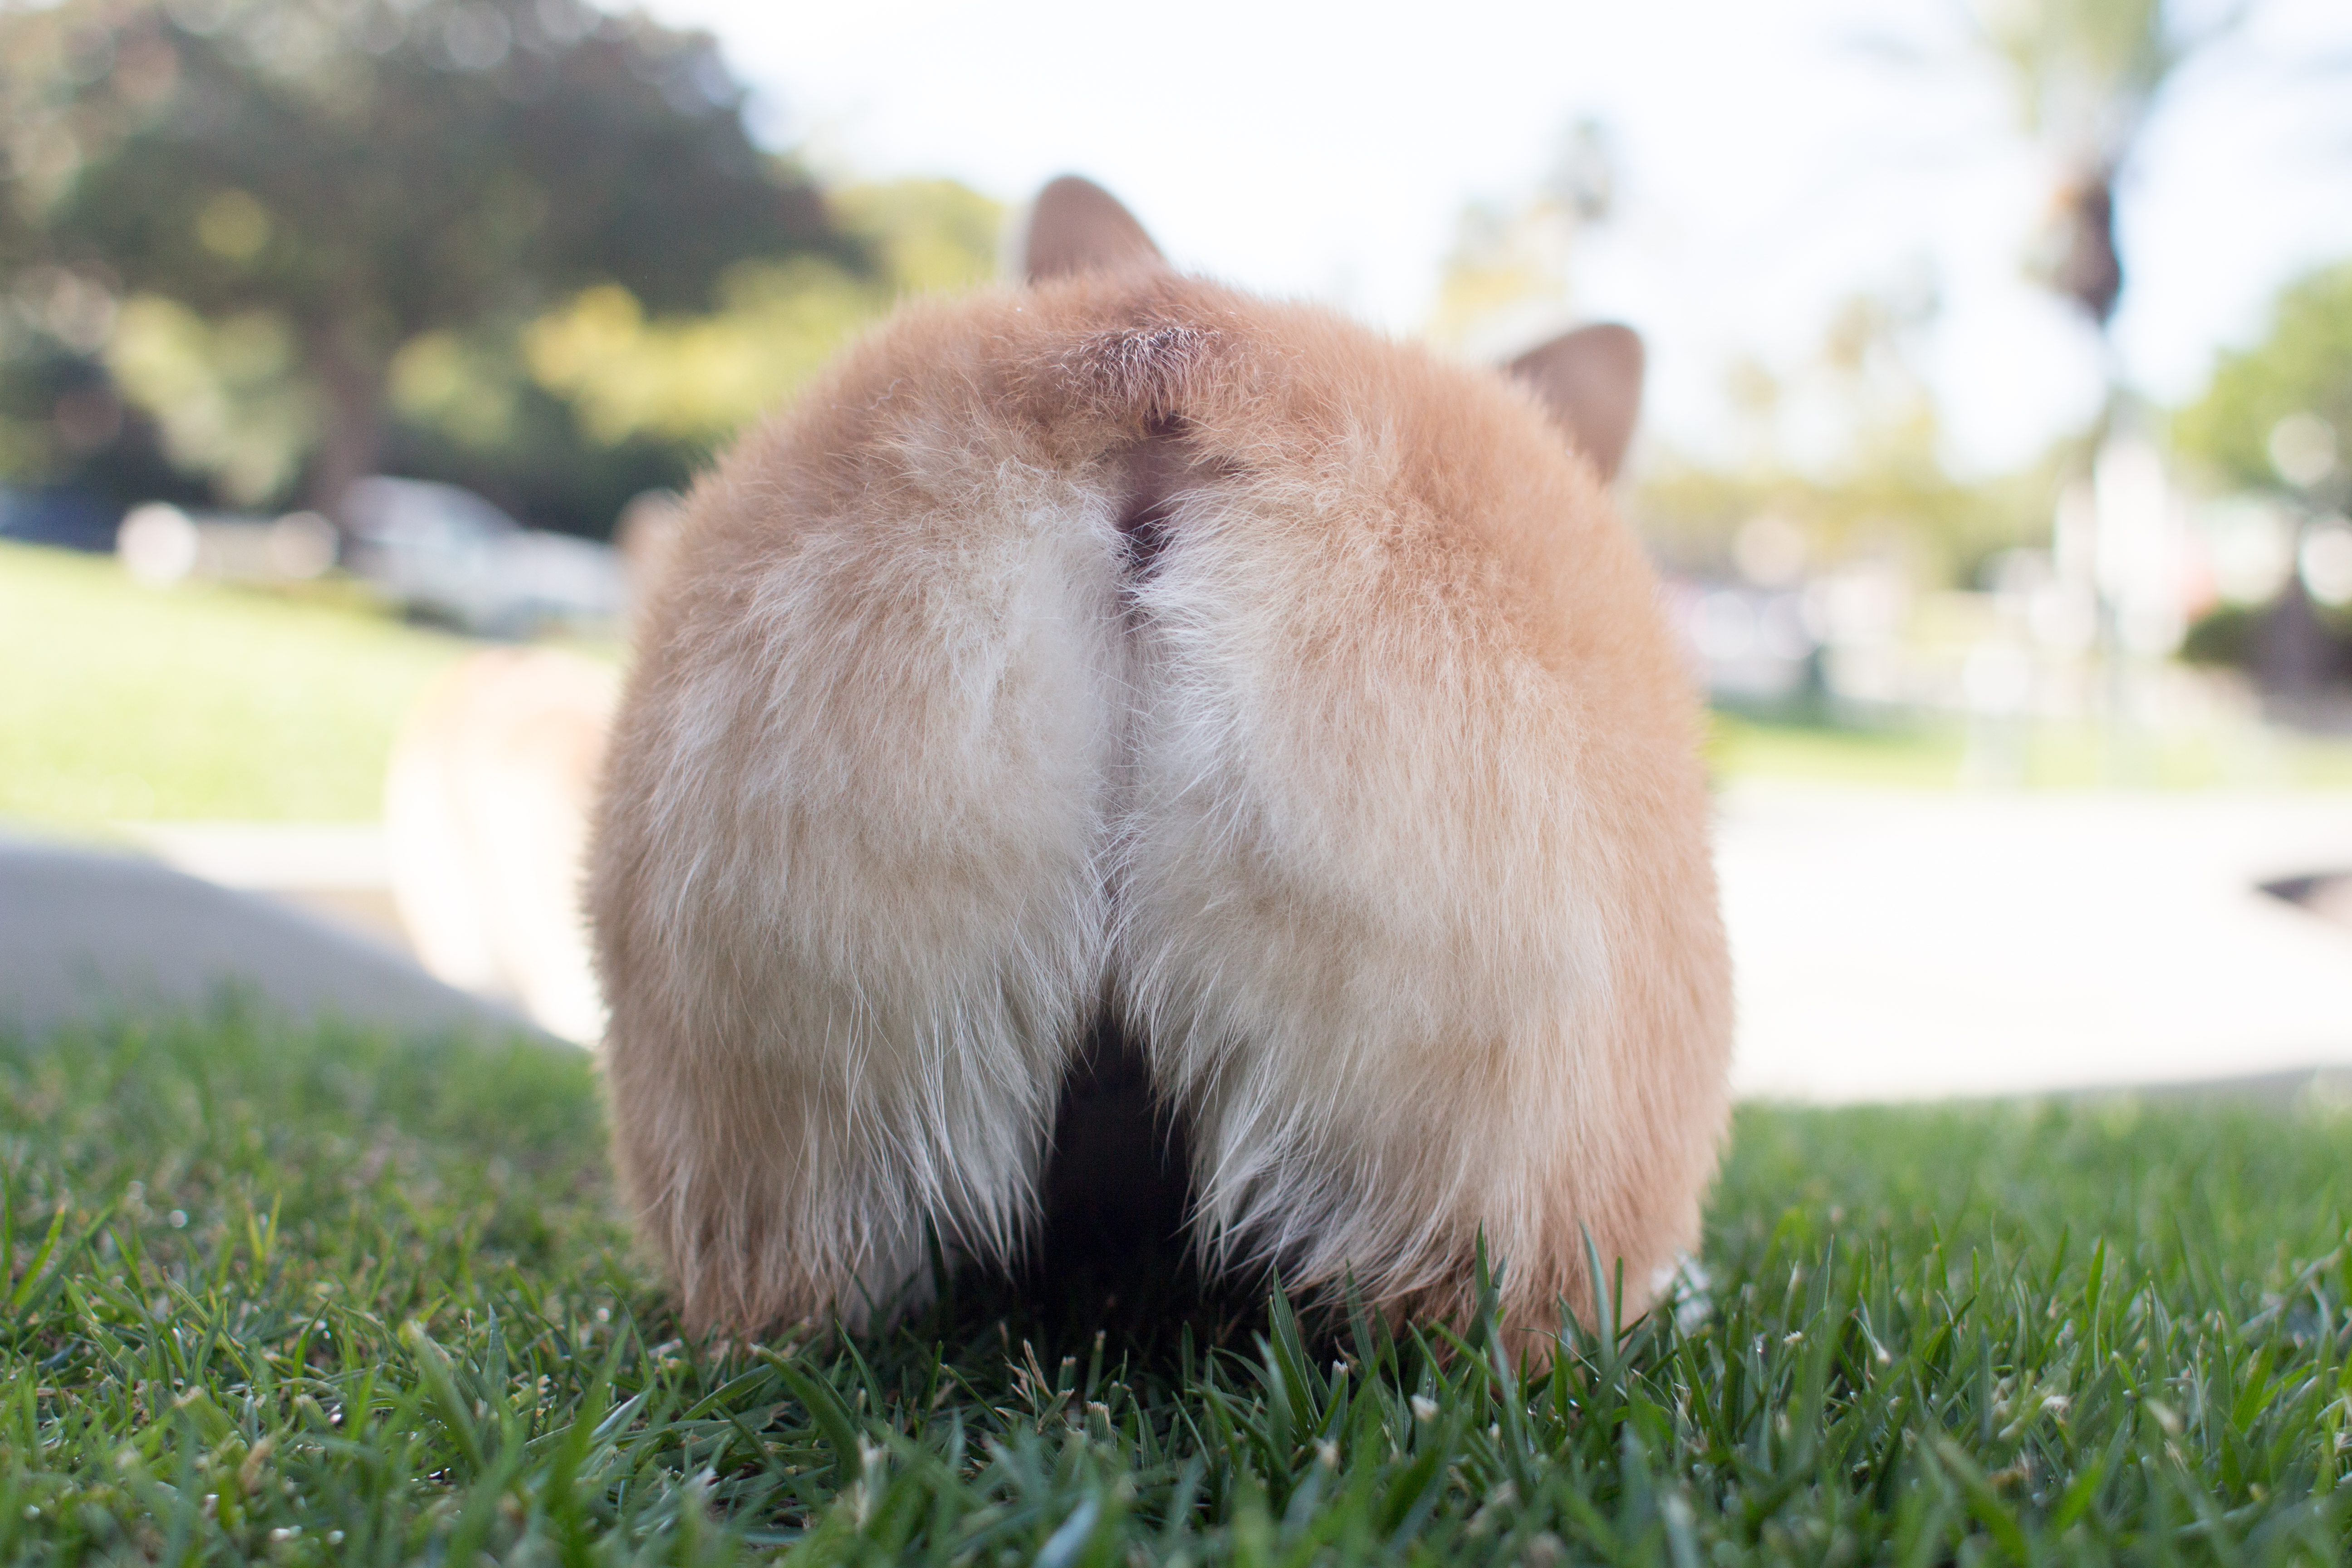 Cute Animal Butts That Will Have You Grinning From Cheek to Cheek